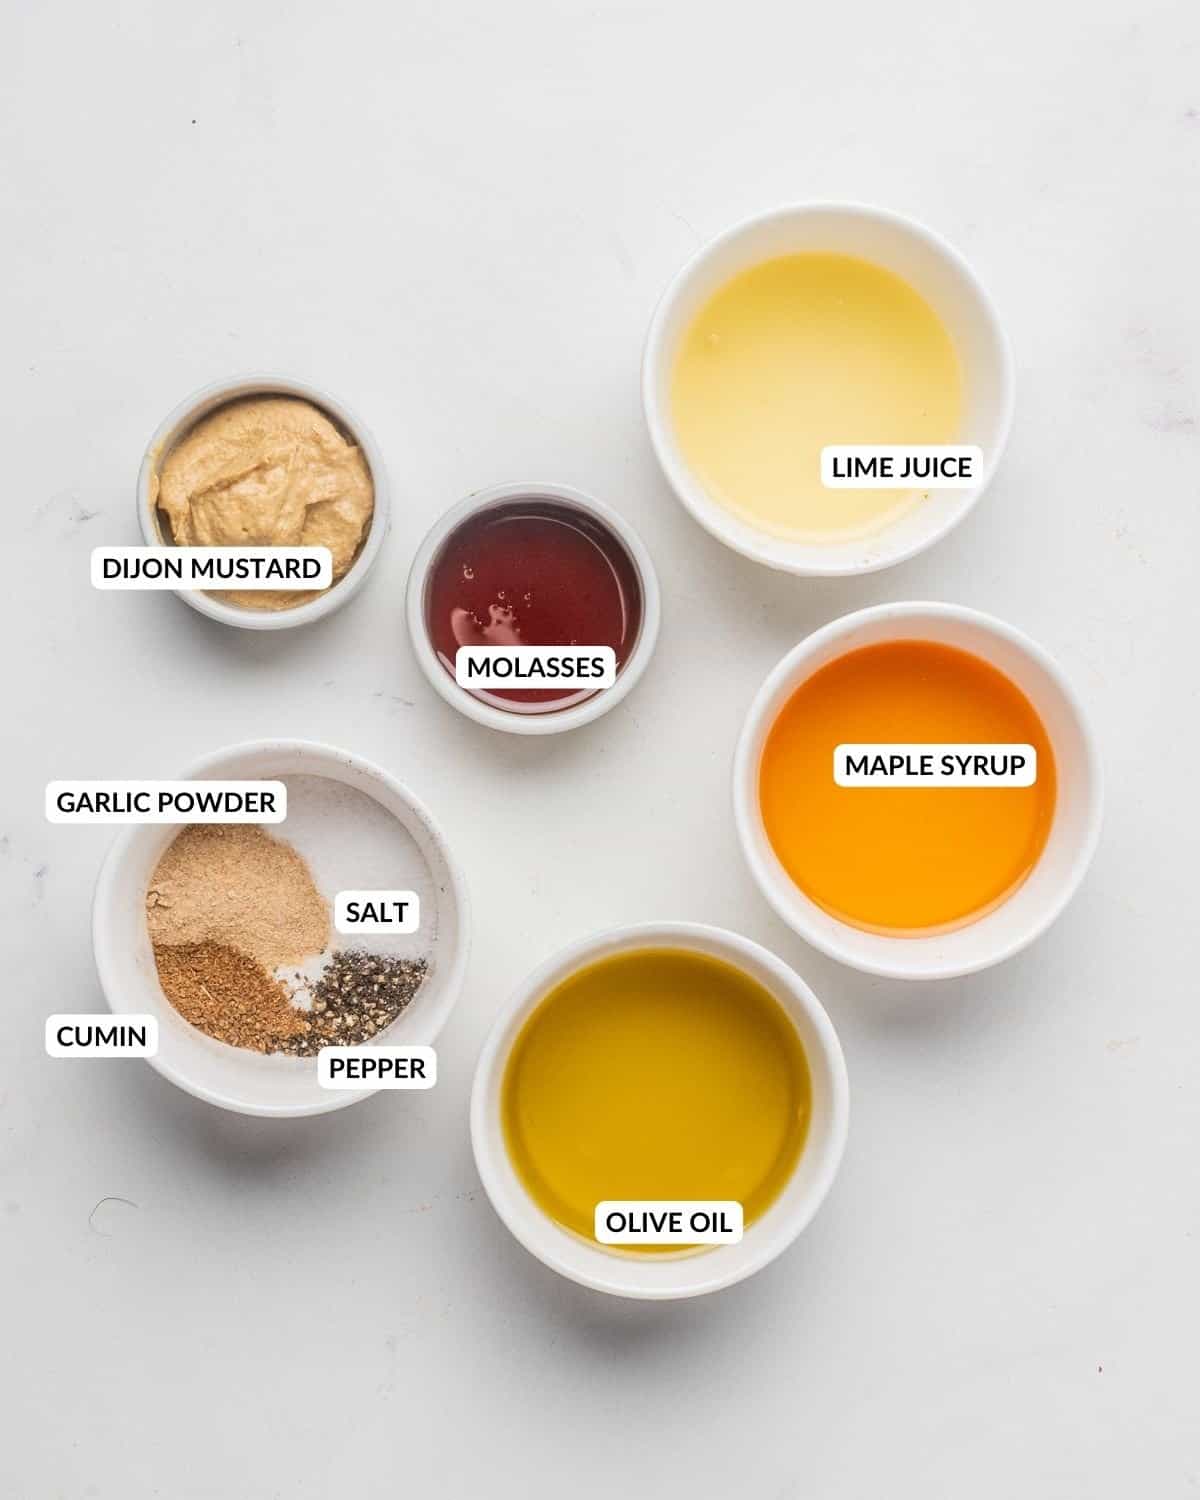 An image of the dressing ingredients in separate bowls with labels.